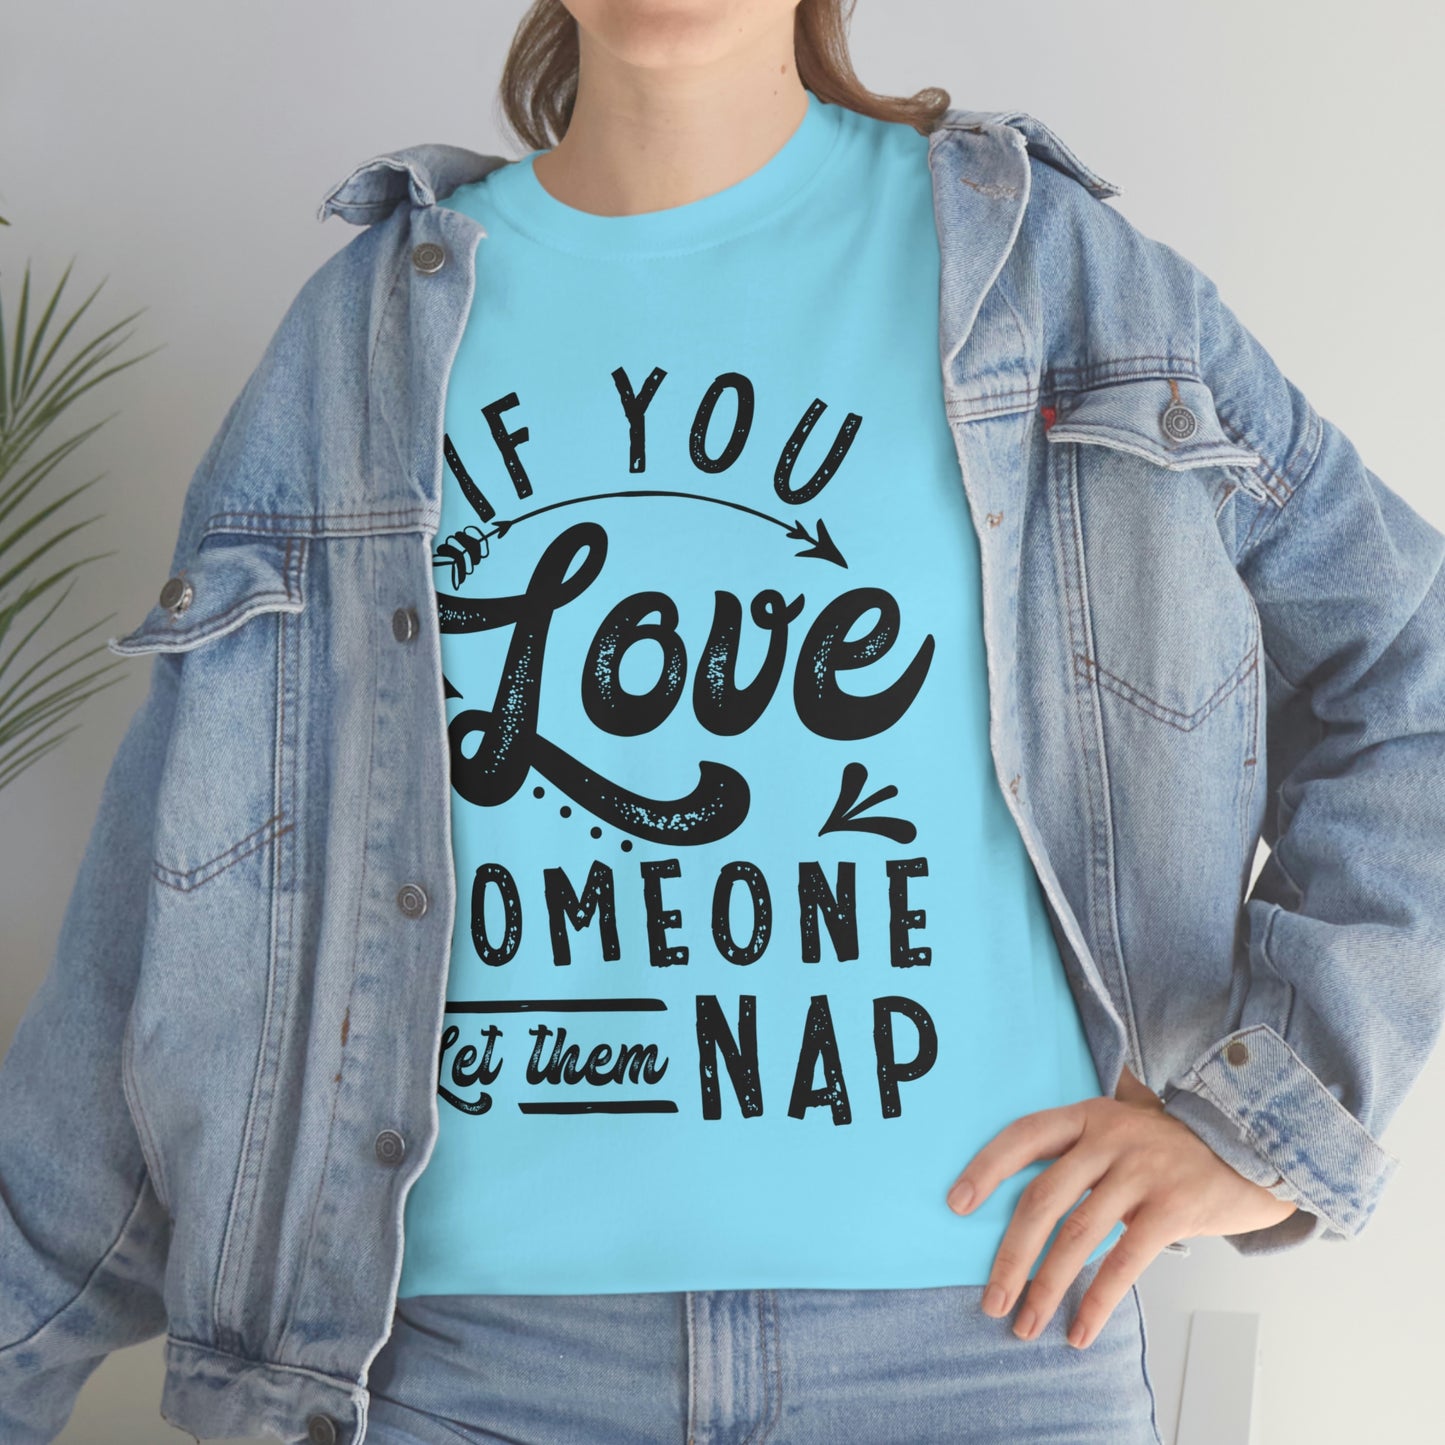 If You Love Someone Let Them Nap Tee